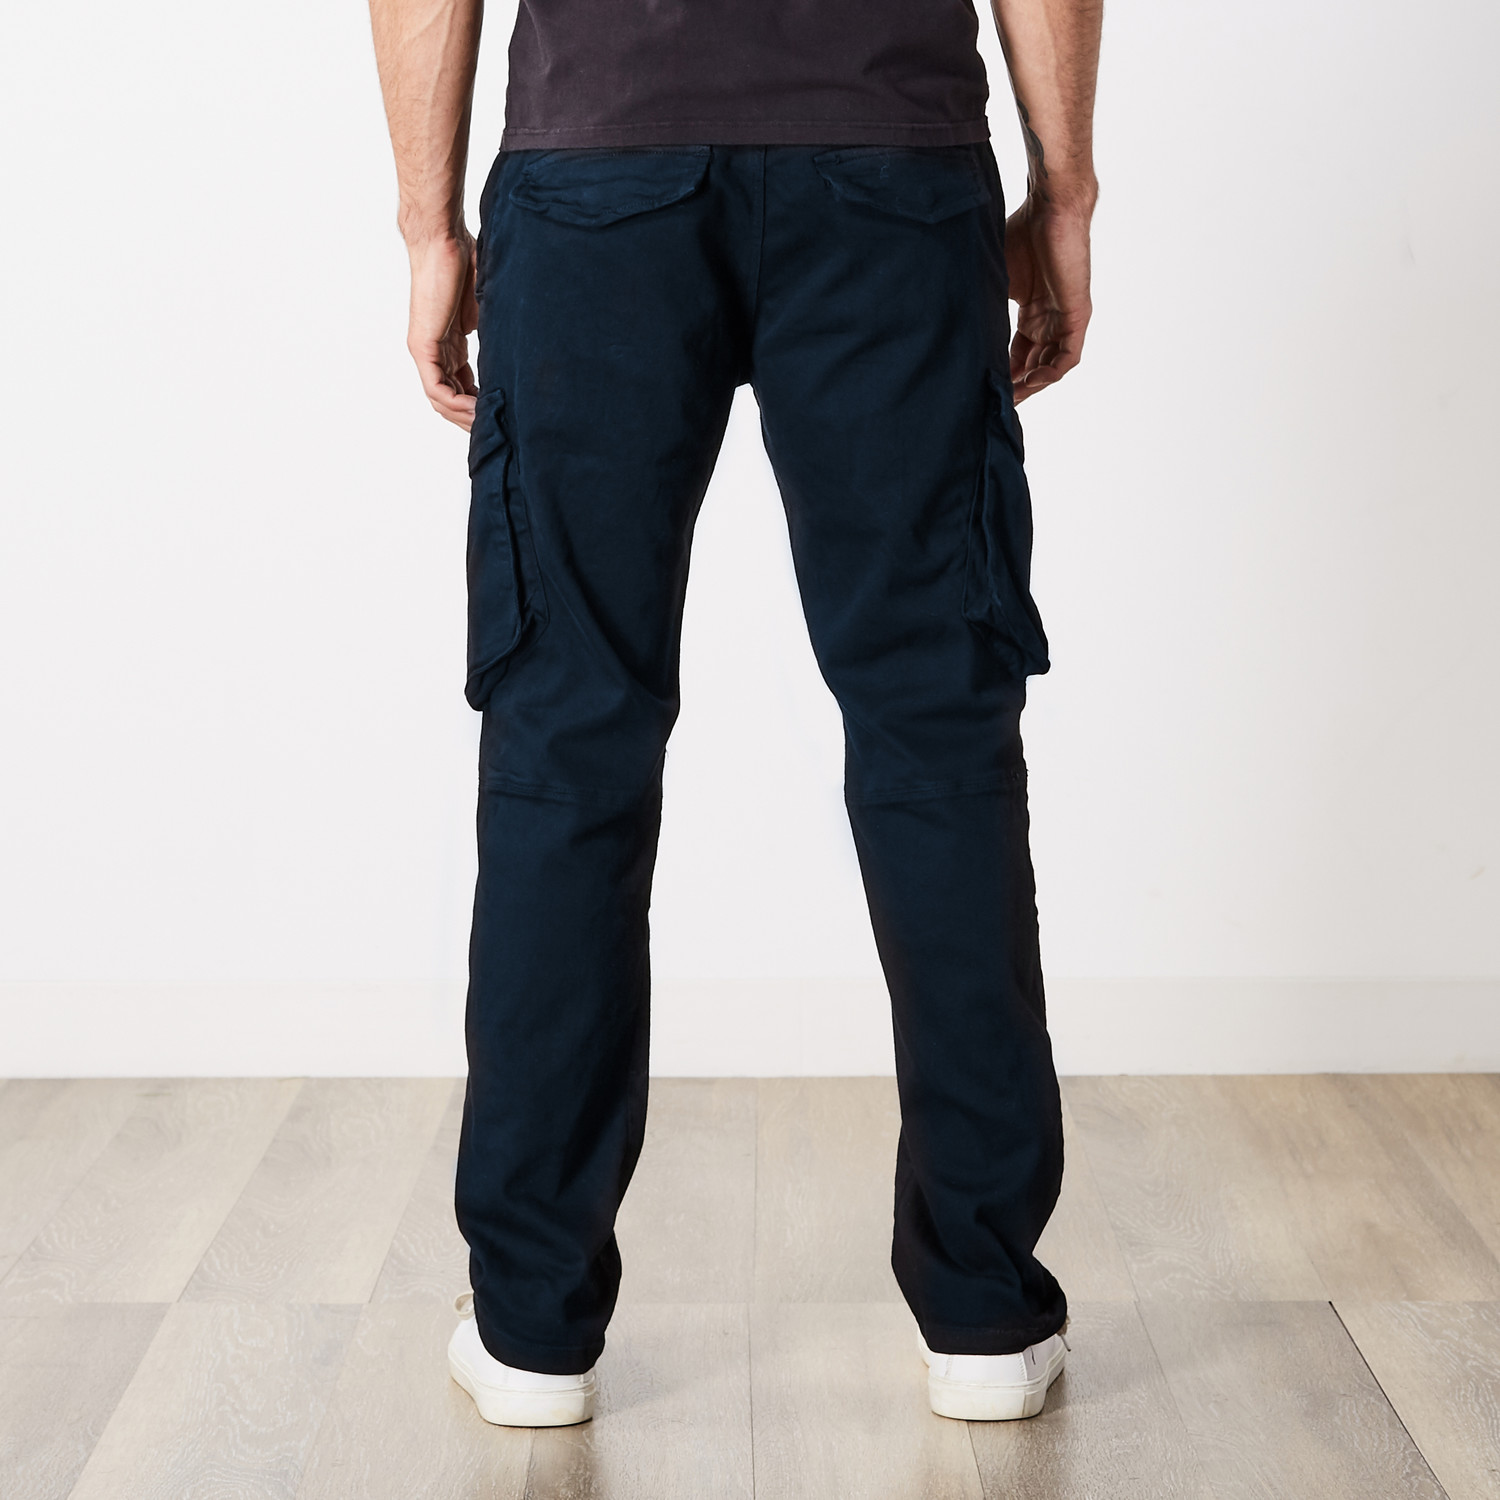 Slim Fit Cargo Pant // Navy (32WX30L) - Xray Jeans - Touch of Modern